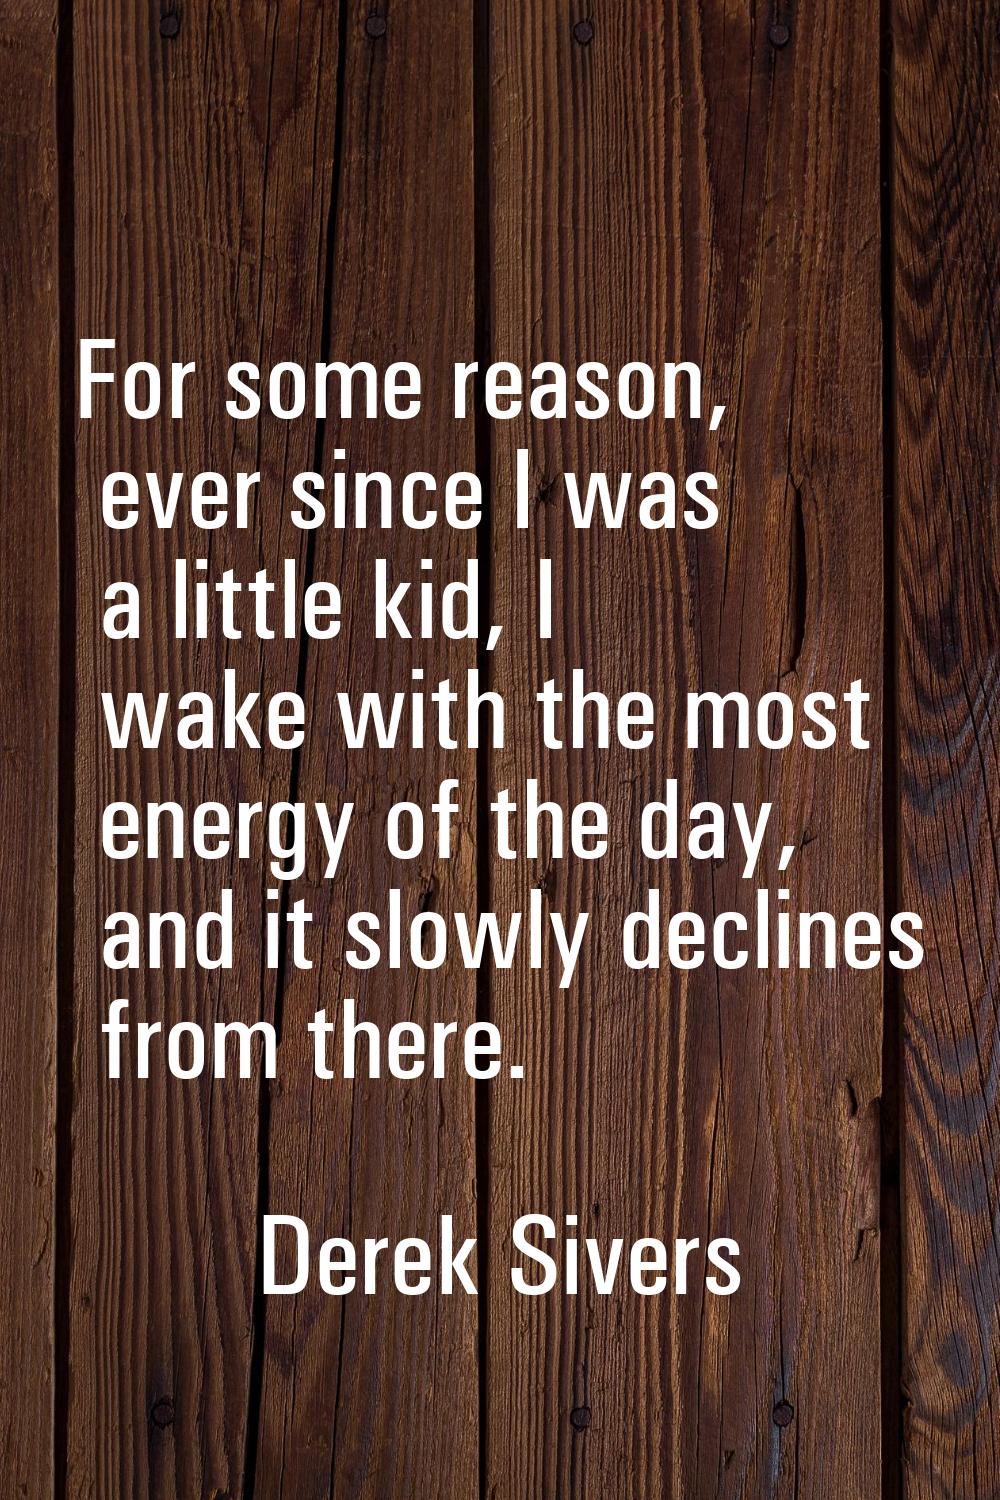 For some reason, ever since I was a little kid, I wake with the most energy of the day, and it slow